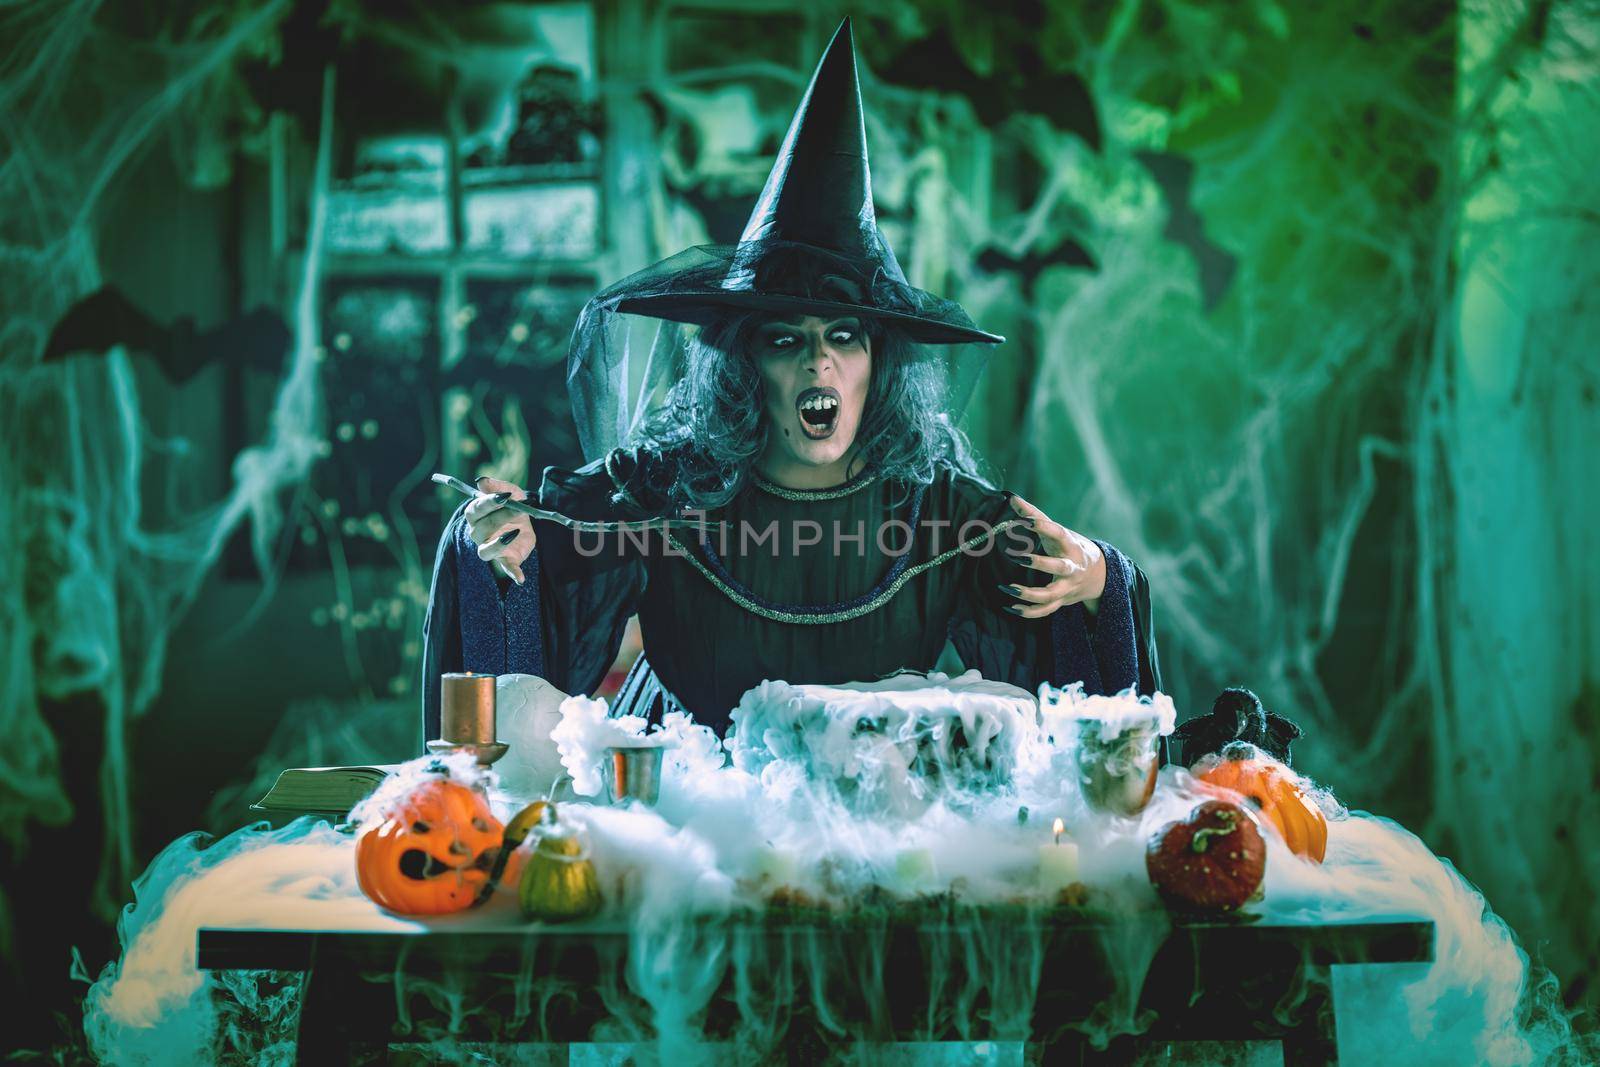 Witch with awfully face and hat on her head in creepy surroundings full of cobweb sends evil. Halloween concept.